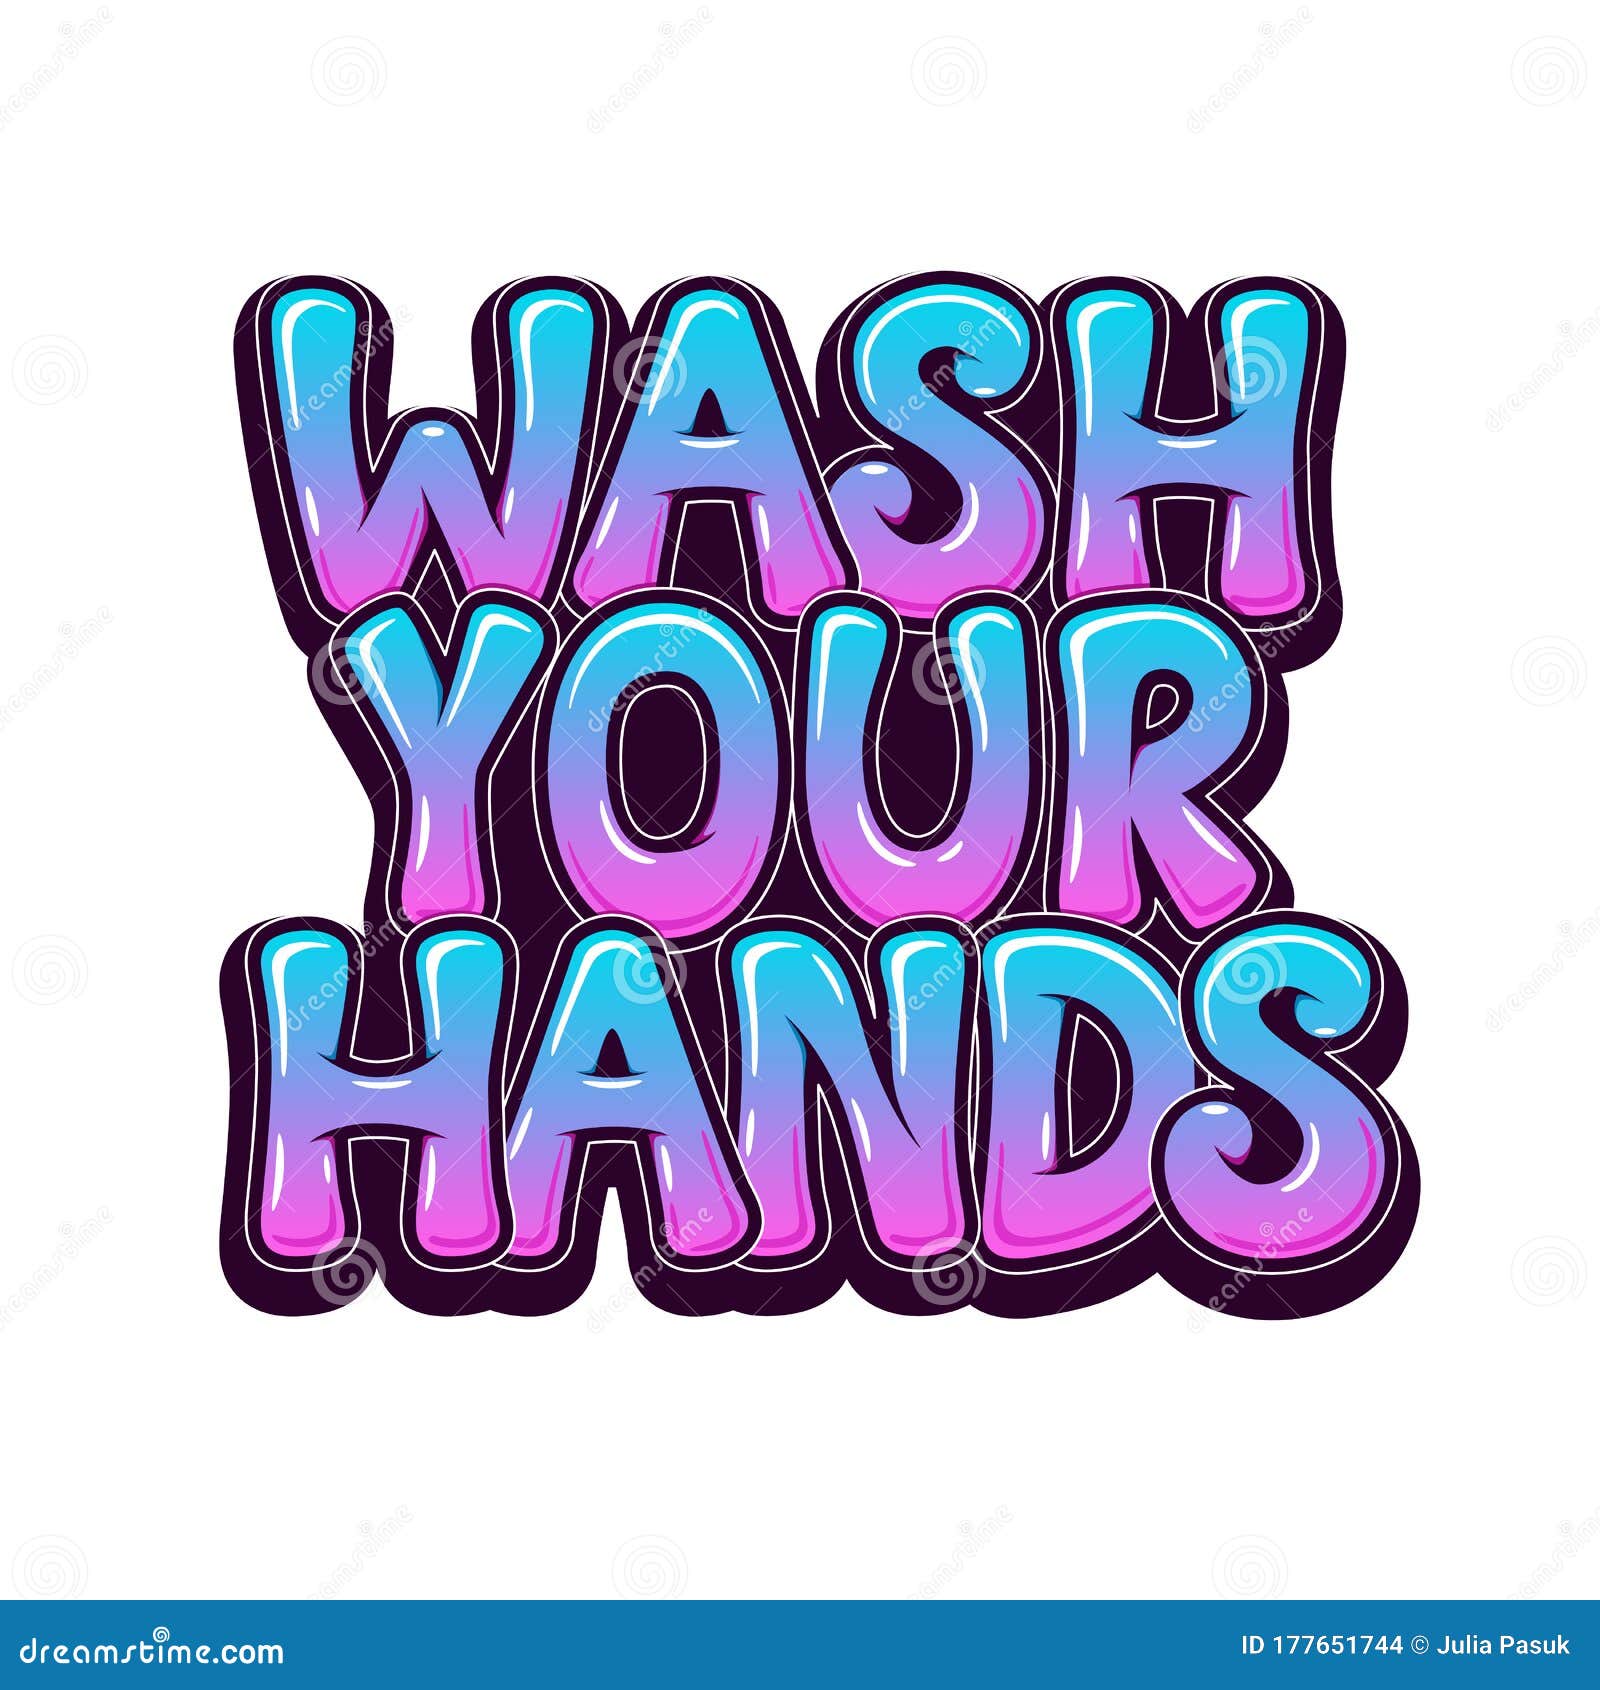 Wash Your Hands Graffiti Design For Banners Posters Signs Vector Stock Vector Illustration Of Card Protection